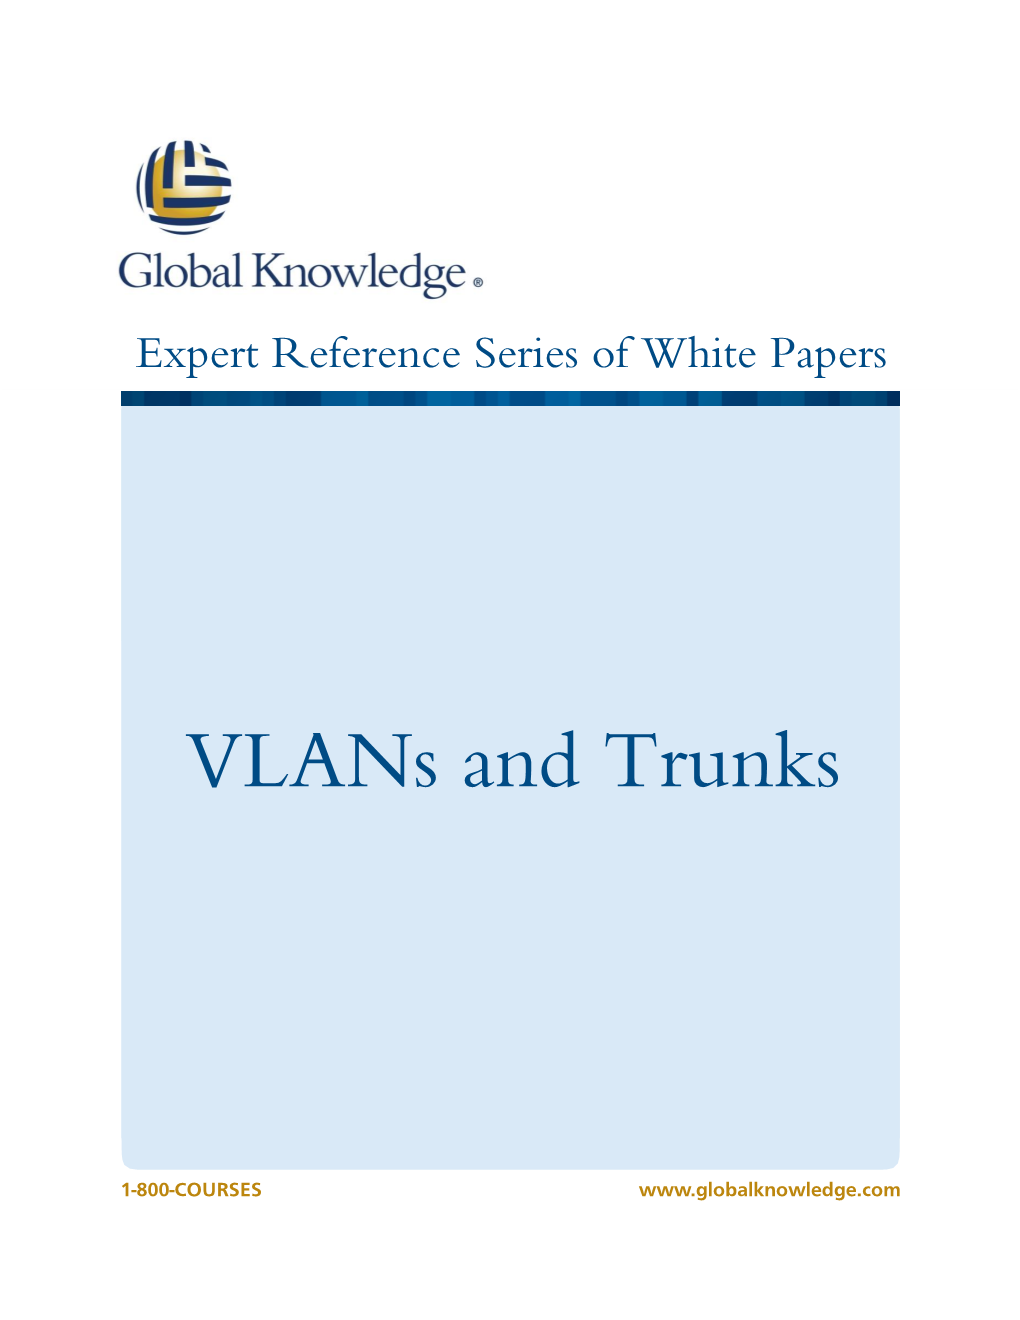 Vlans and Trunks